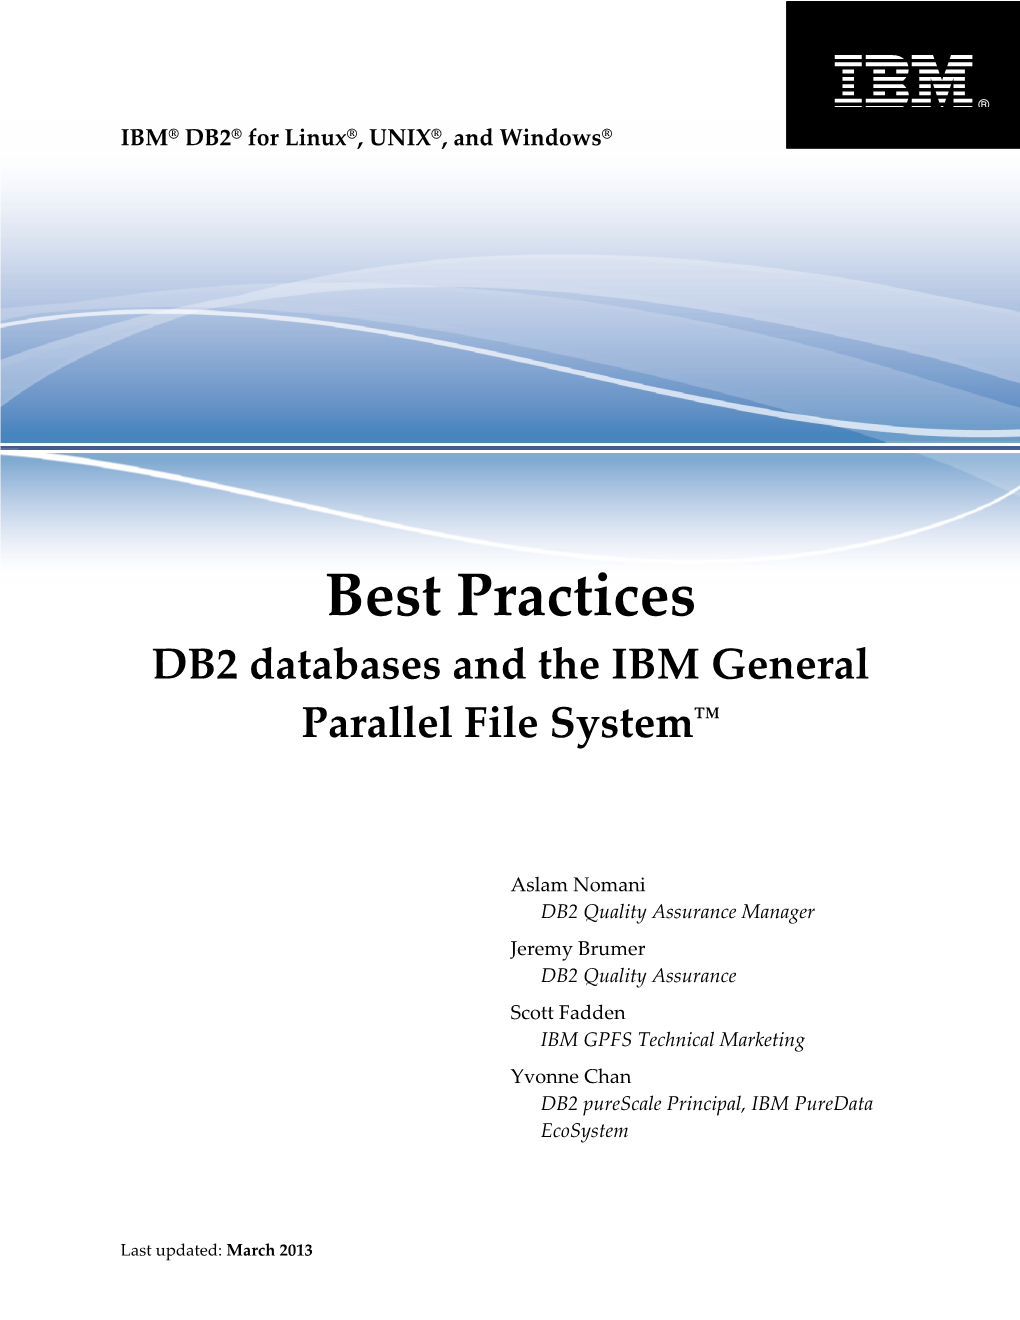 Best Practices DB2 Databases and the IBM General ™ Parallel File Systemp